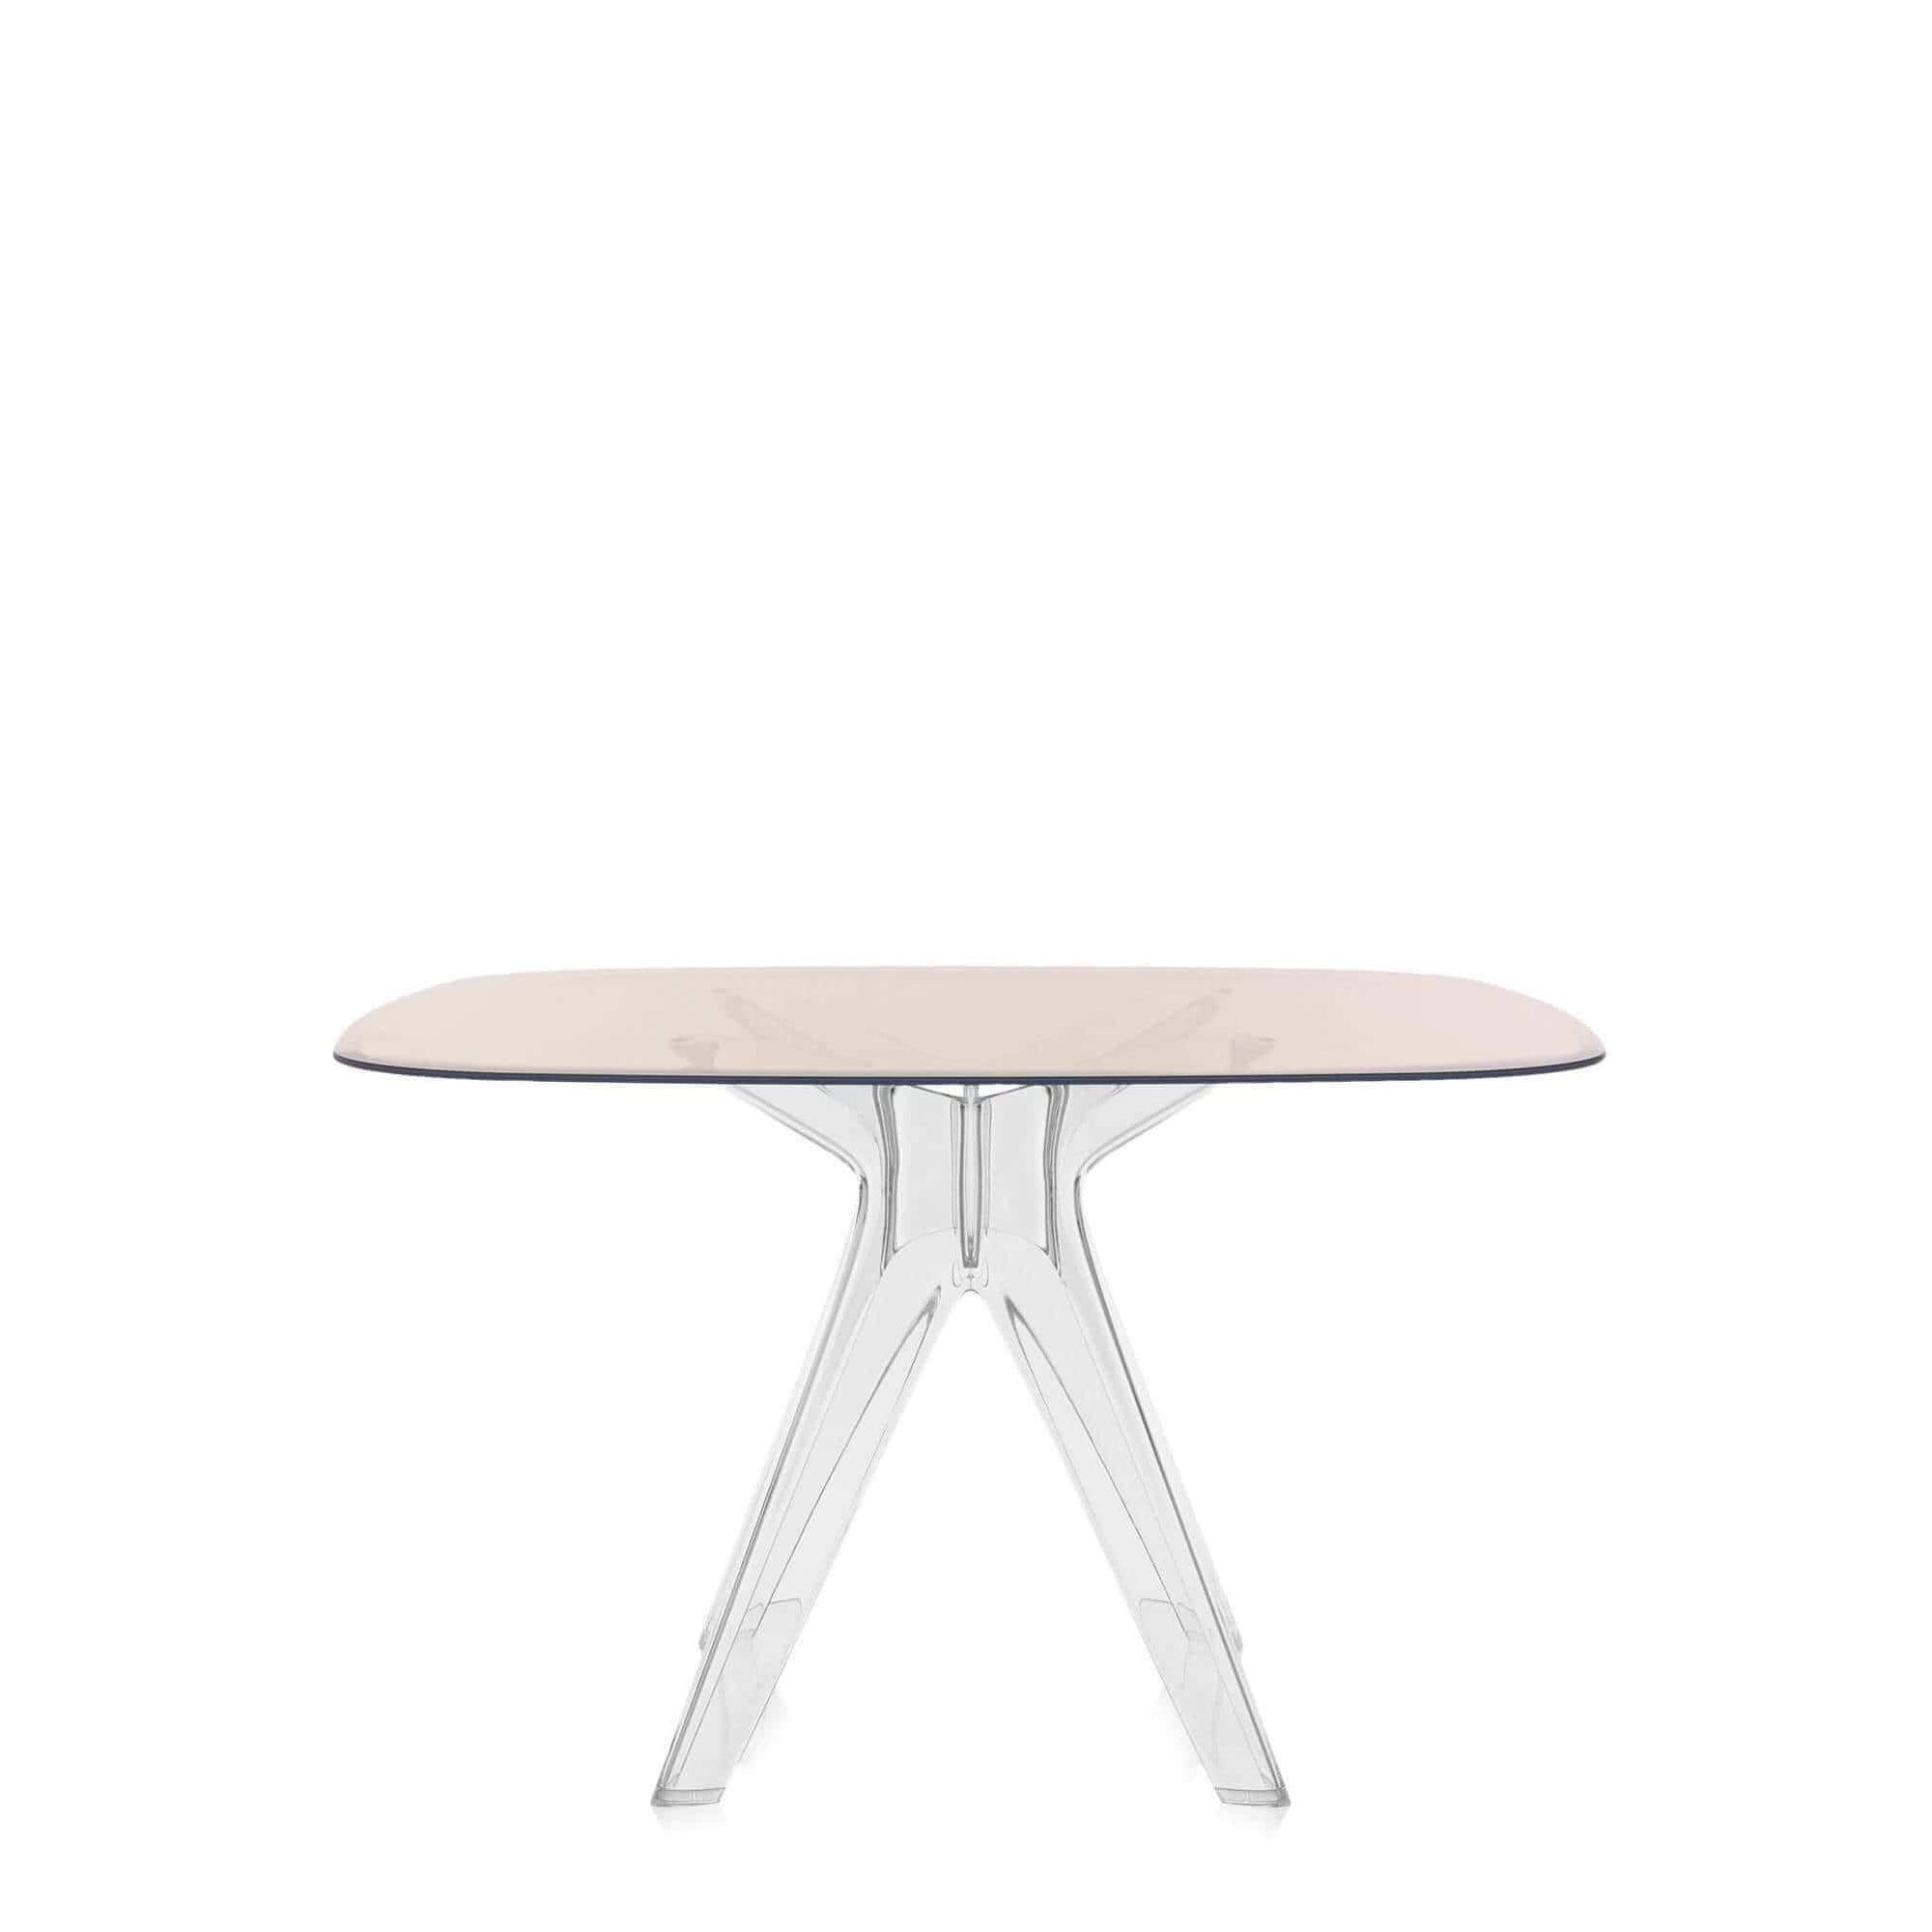 Sir Gio Square Table - Curated - Furniture - Kartell